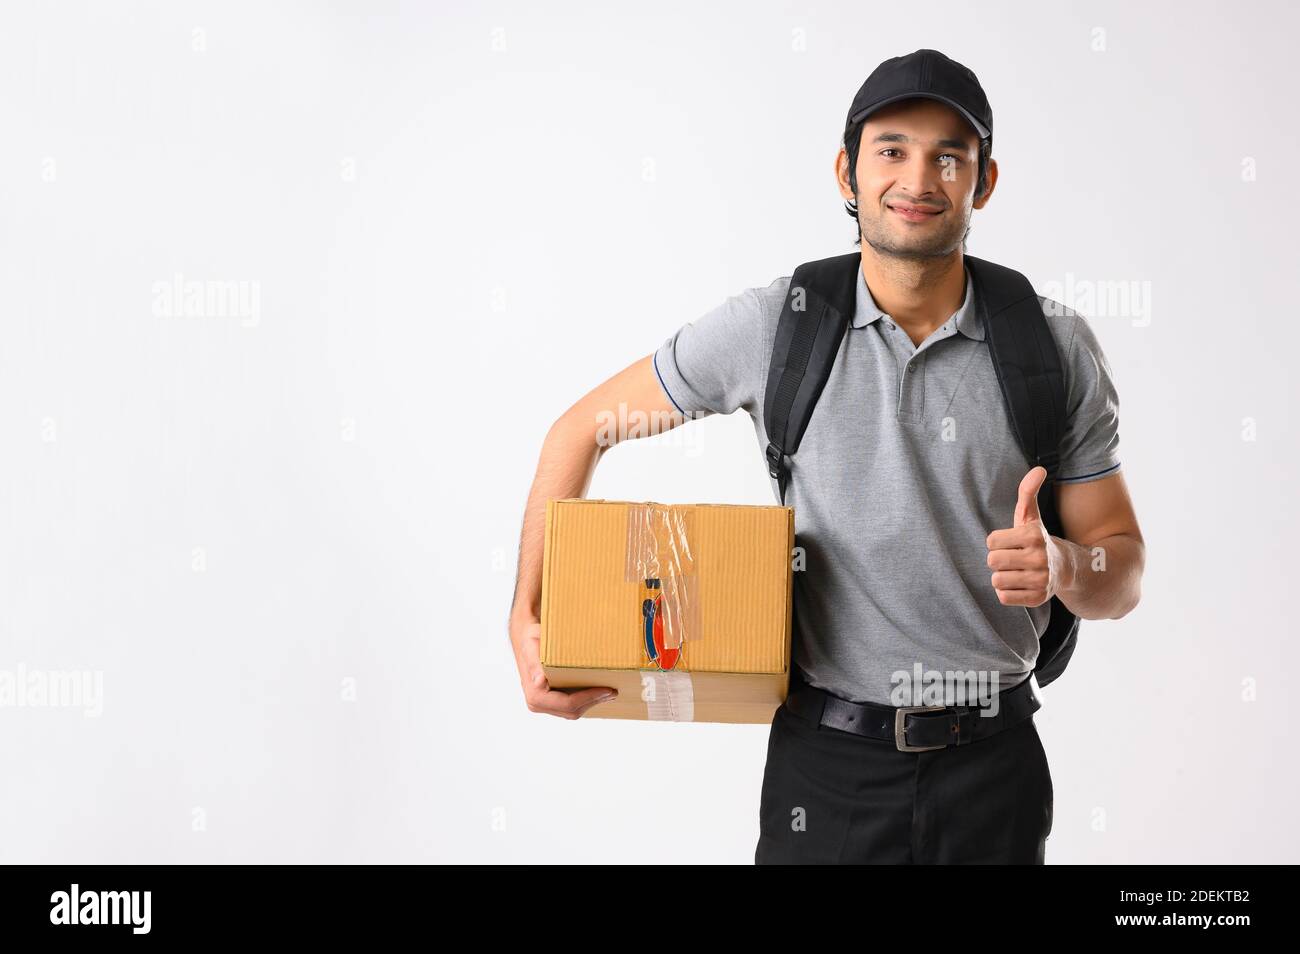 Delivery boy giving thumbs up with a box in one hand Stock Photo